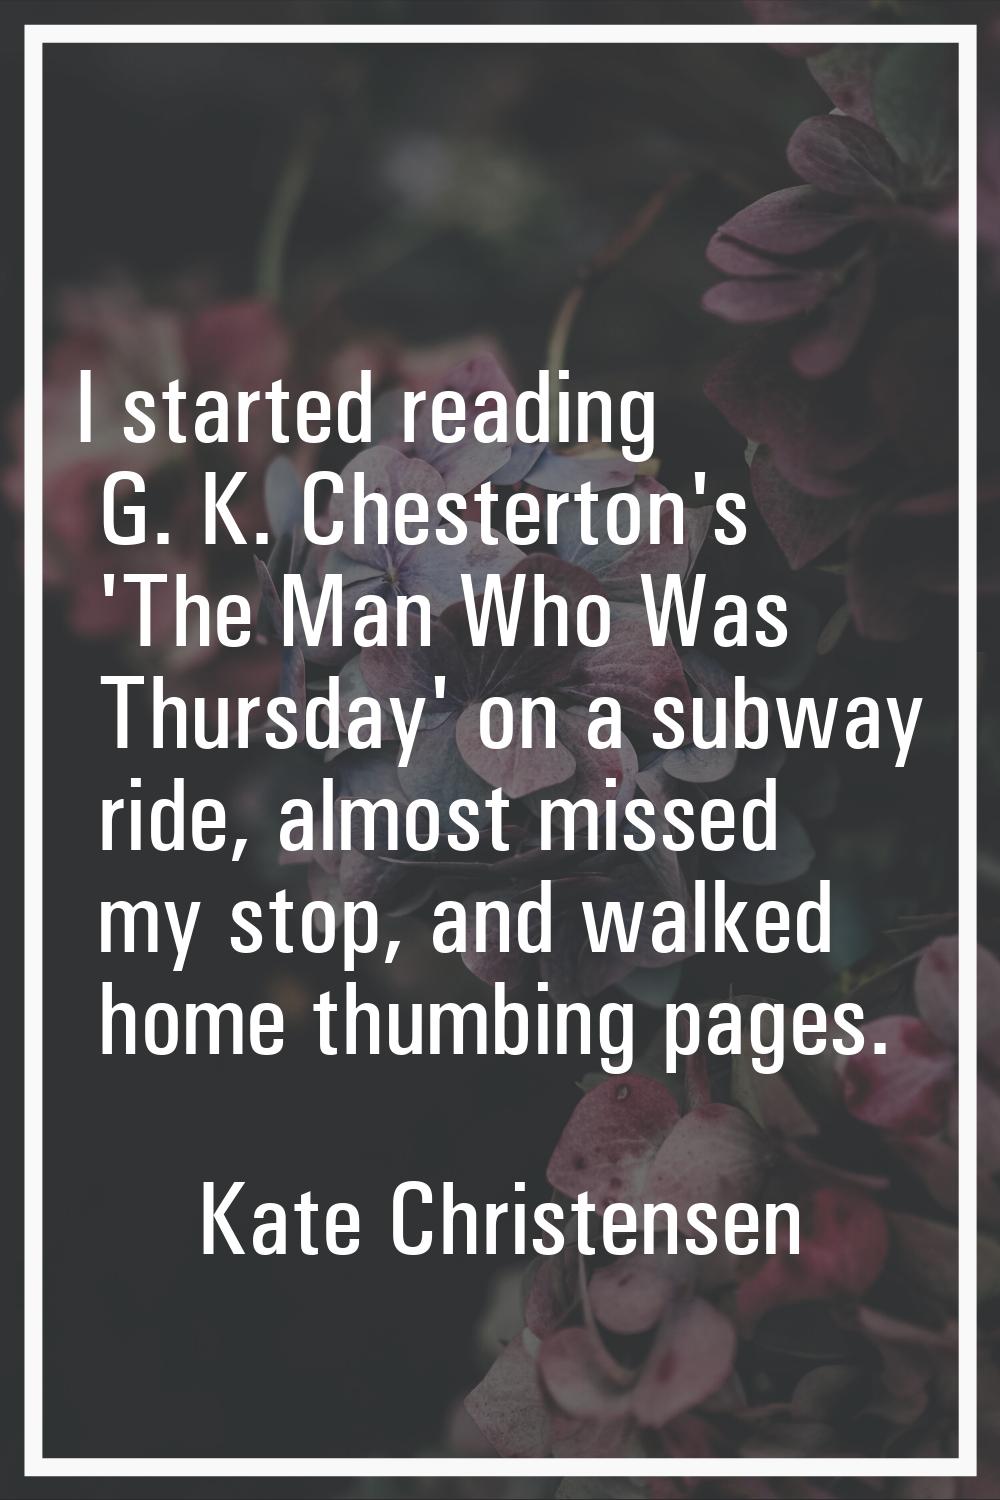 I started reading G. K. Chesterton's 'The Man Who Was Thursday' on a subway ride, almost missed my 